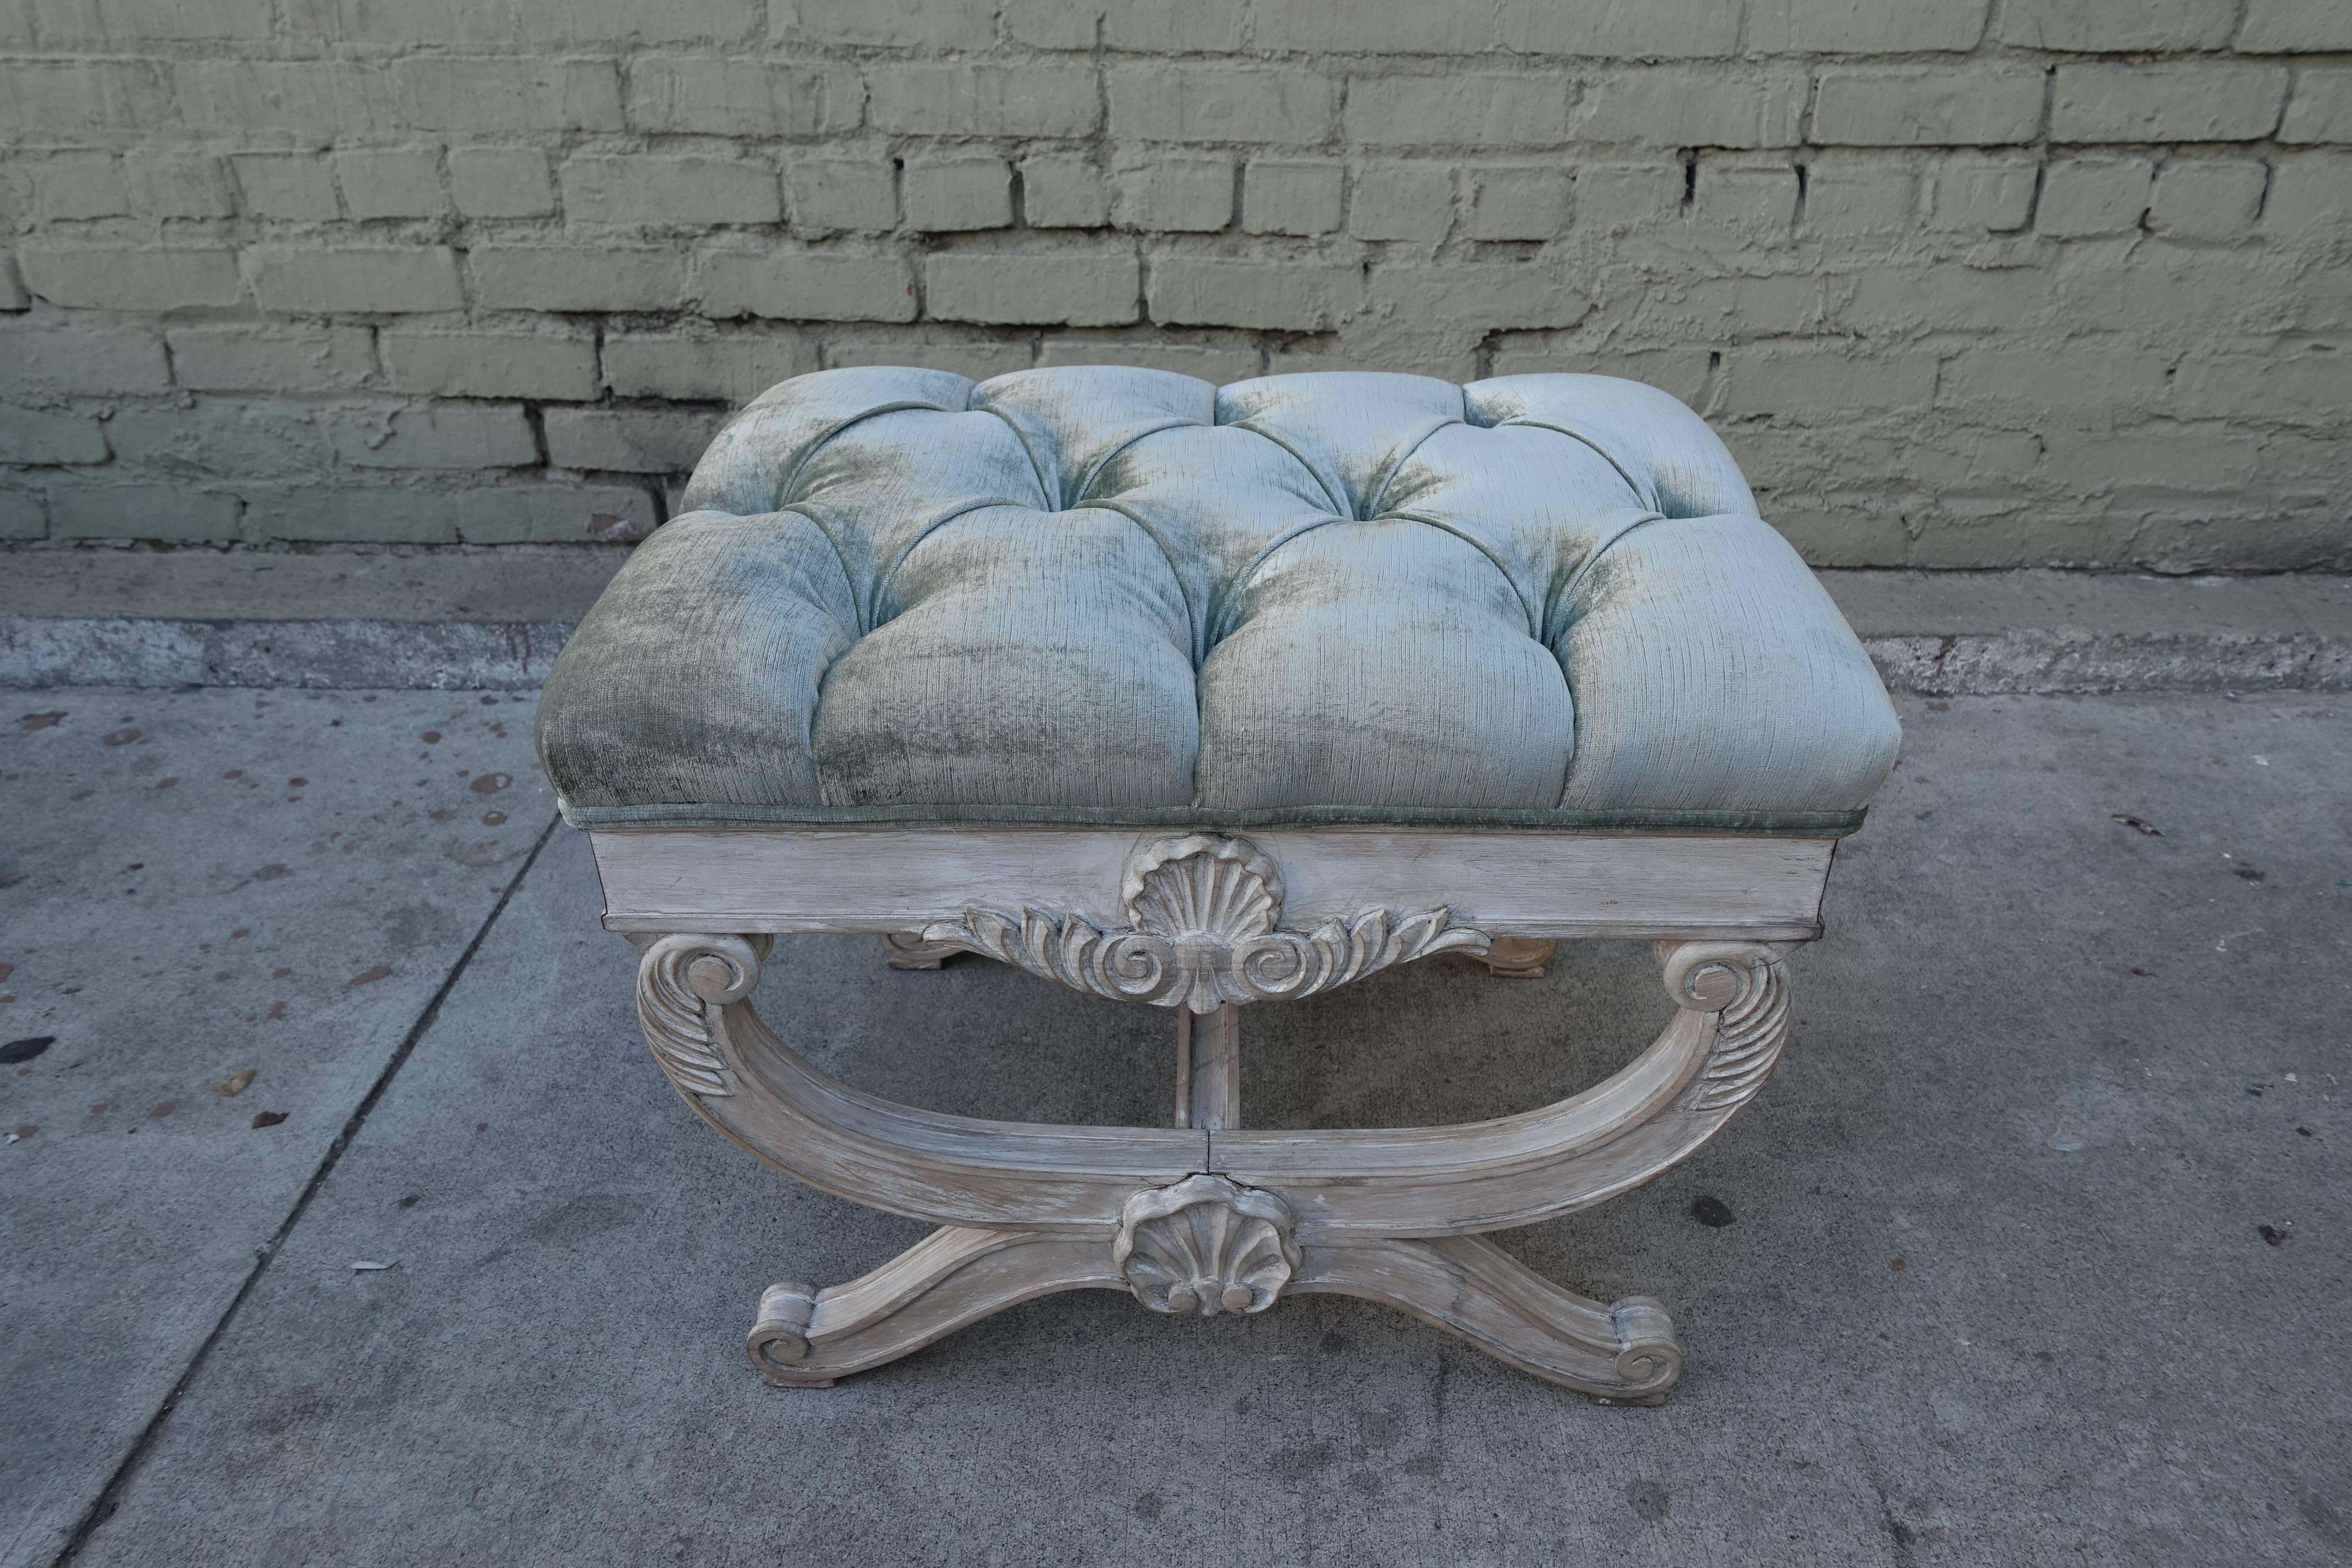 1930s French carved Painted "X" bench with Velvet upholstery.